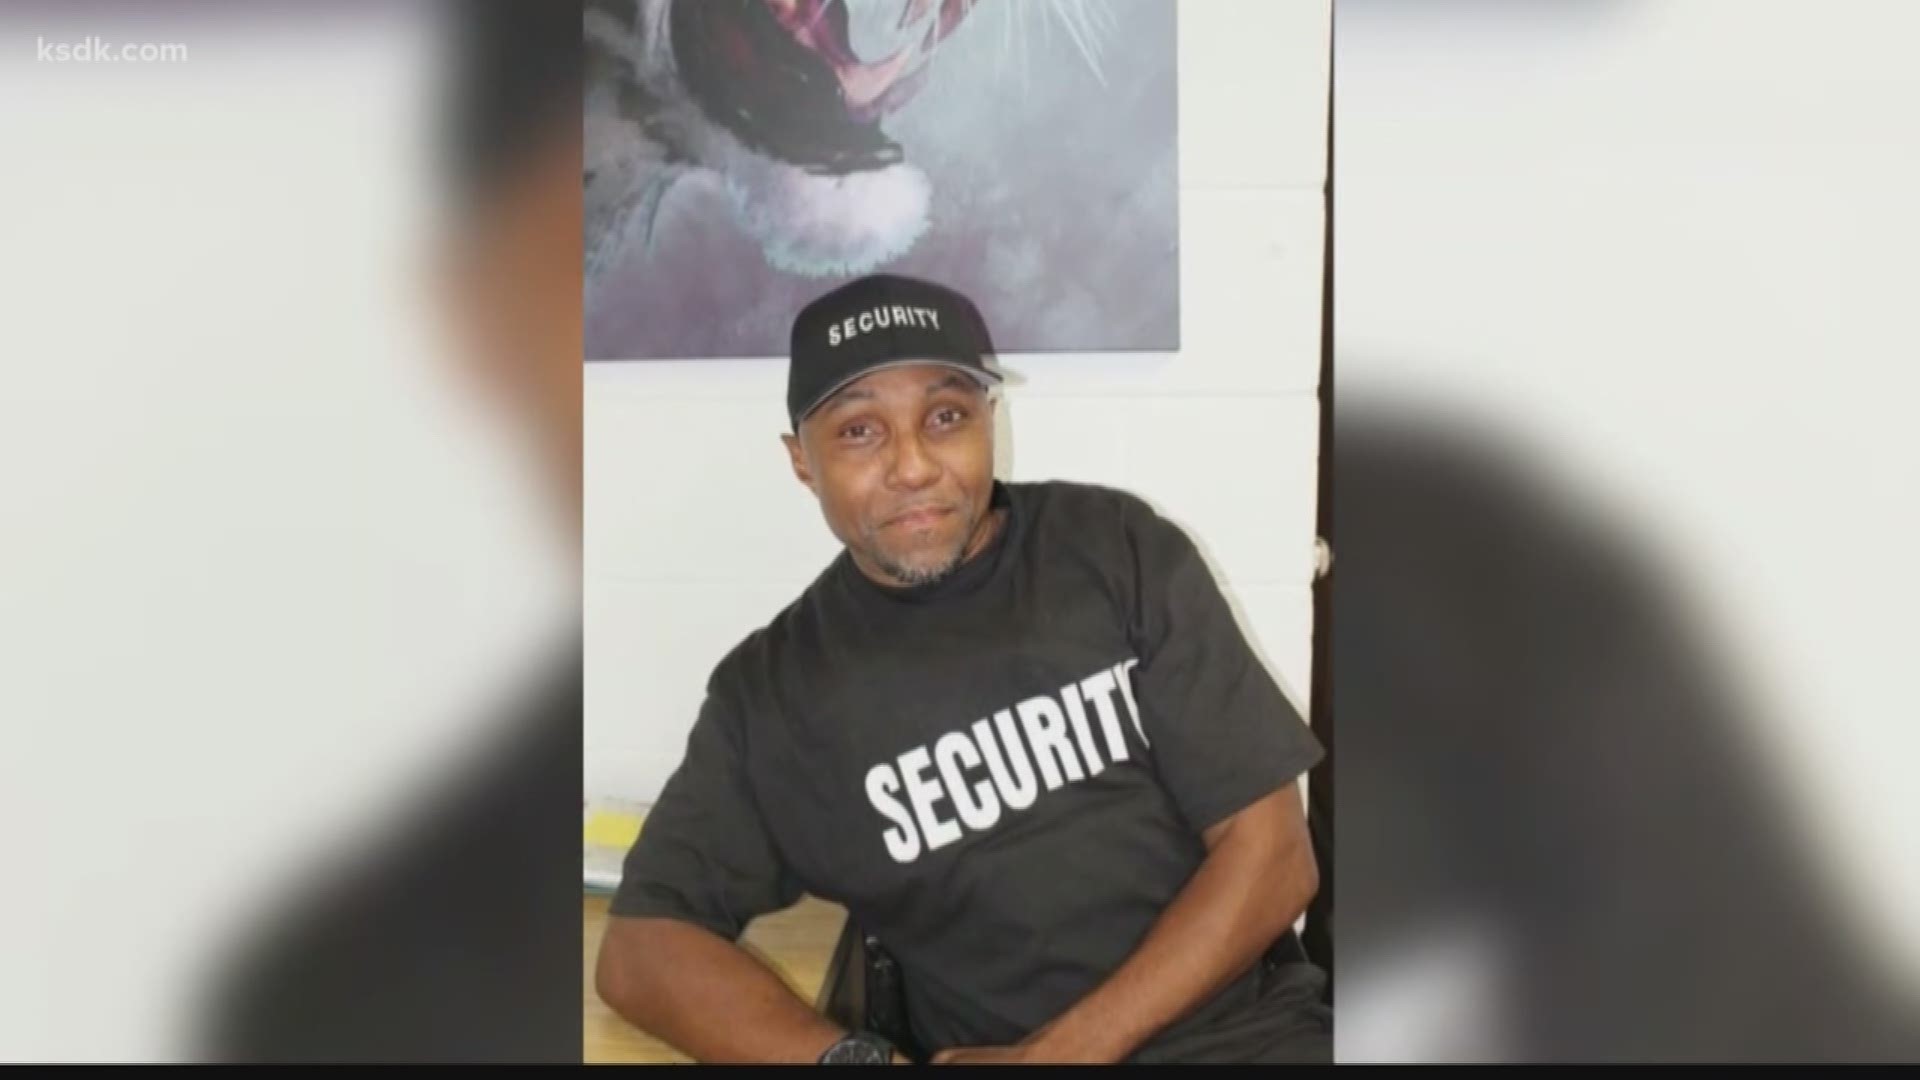 His family said he died doing what he loved, serving his community.